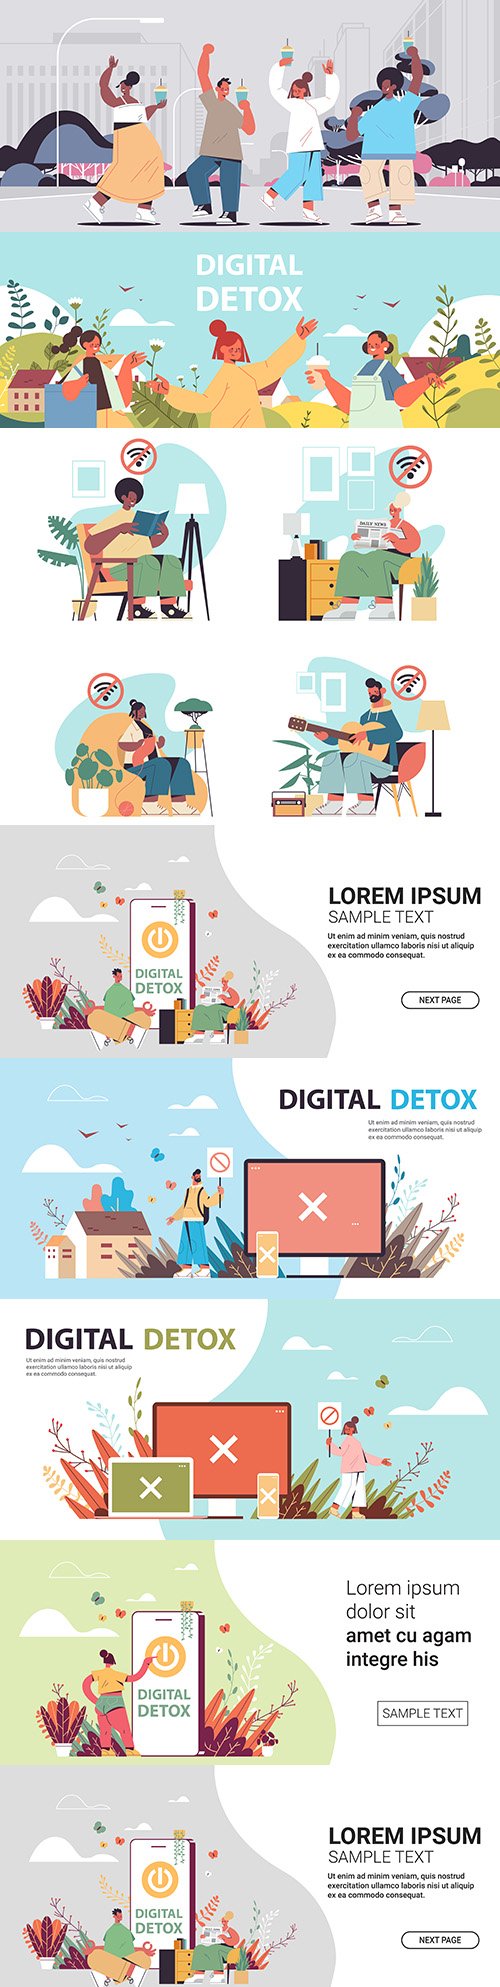 People walk and spend time without gadgets digital detox